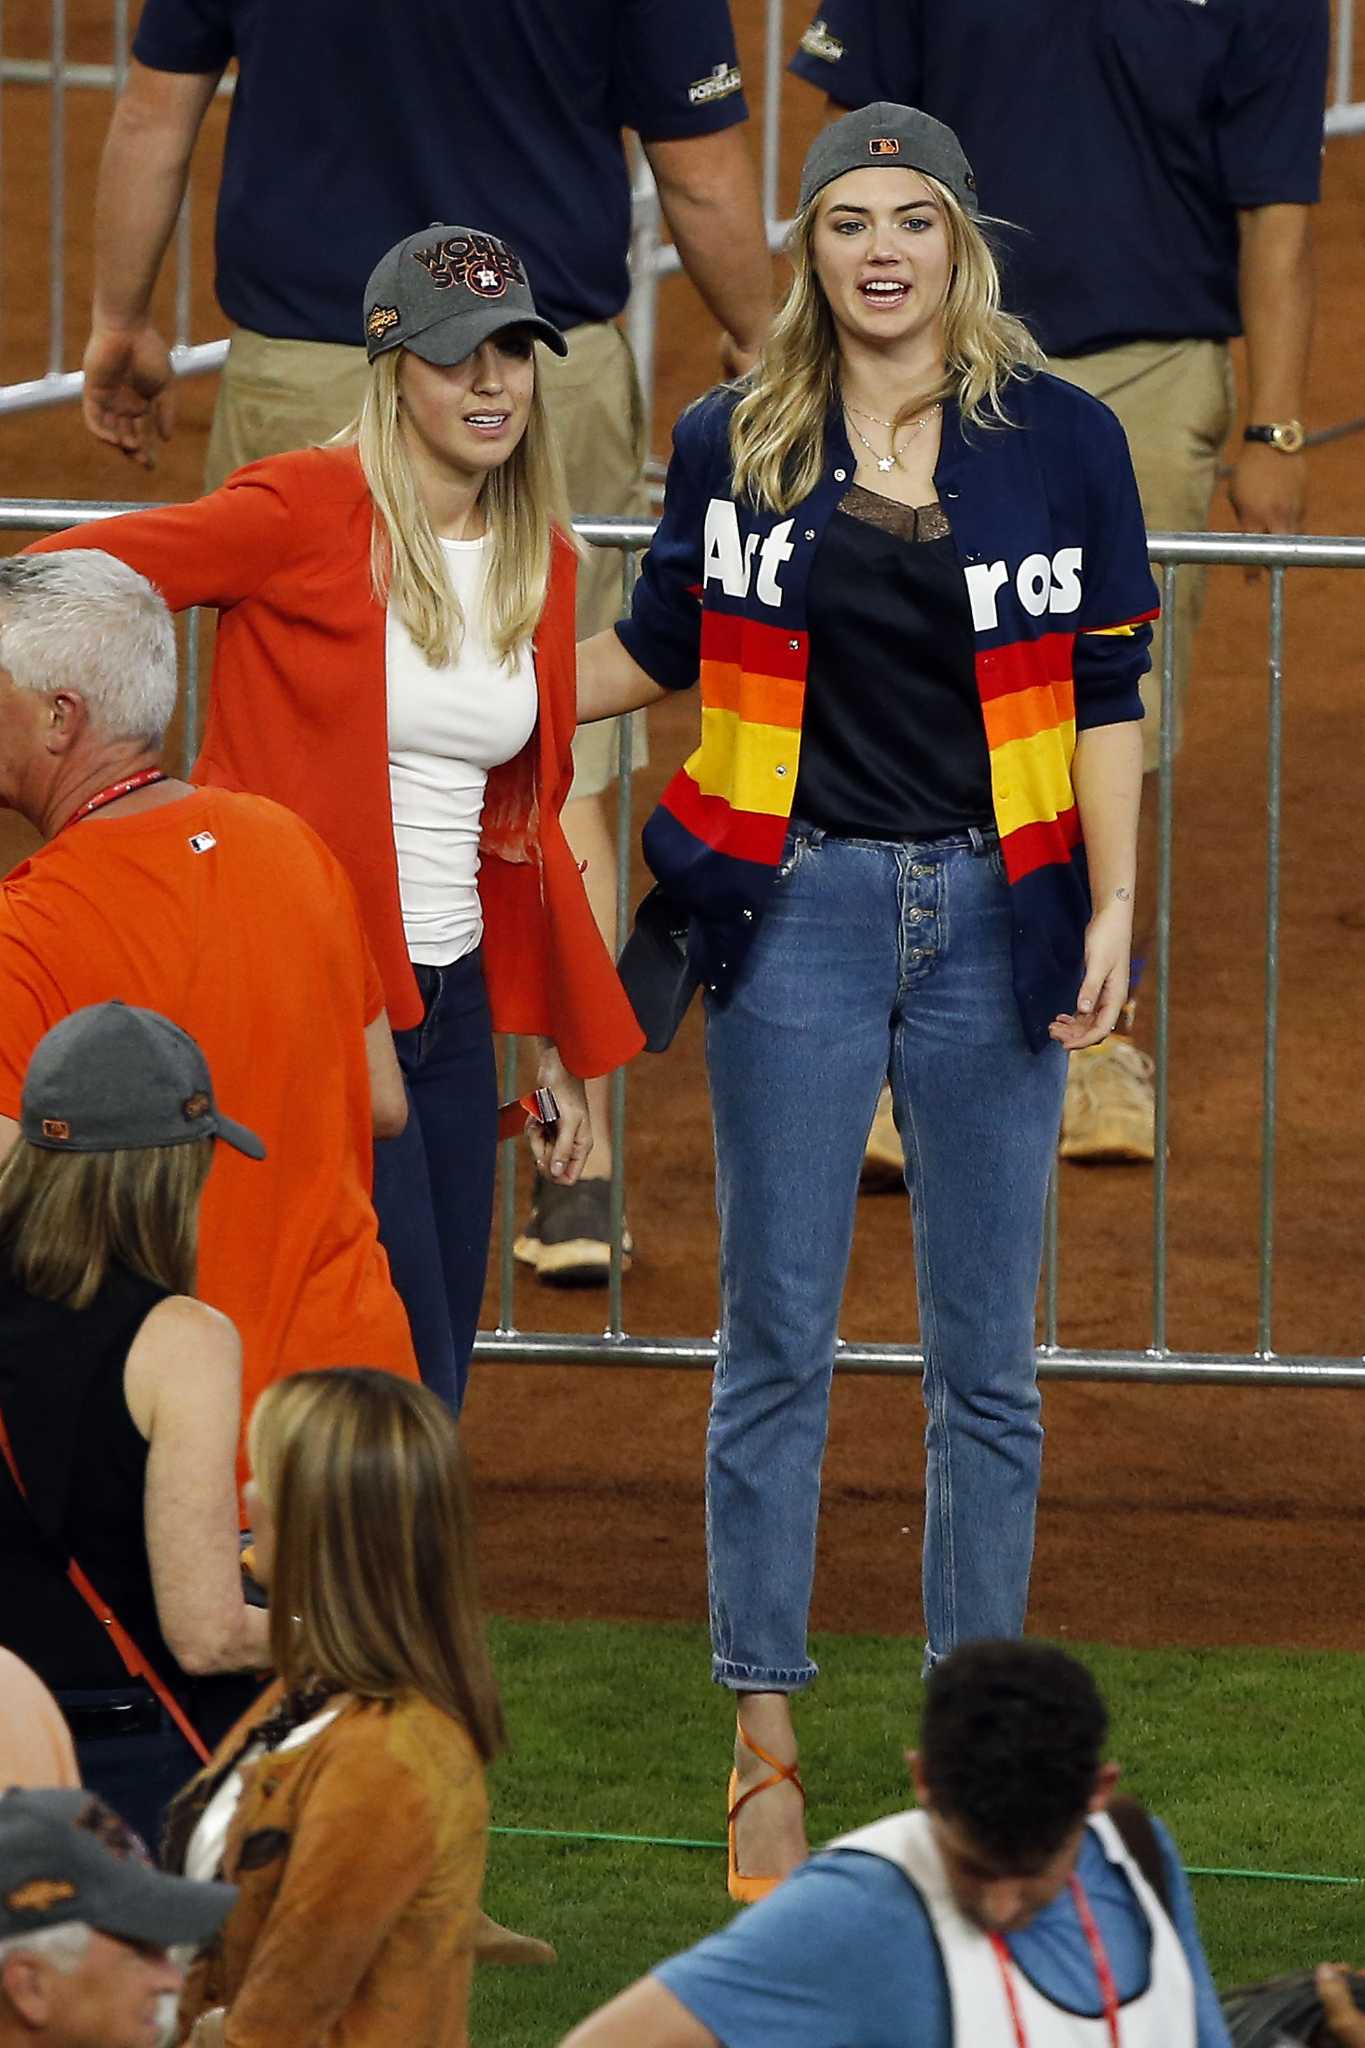 KPRC2 / Click2Houston - Kate Upton was the most recent big name to wear  the famous Astros sweater, which we're profiling tonight on KPRC2 News.  Astros legend Nolan Ryan was one of